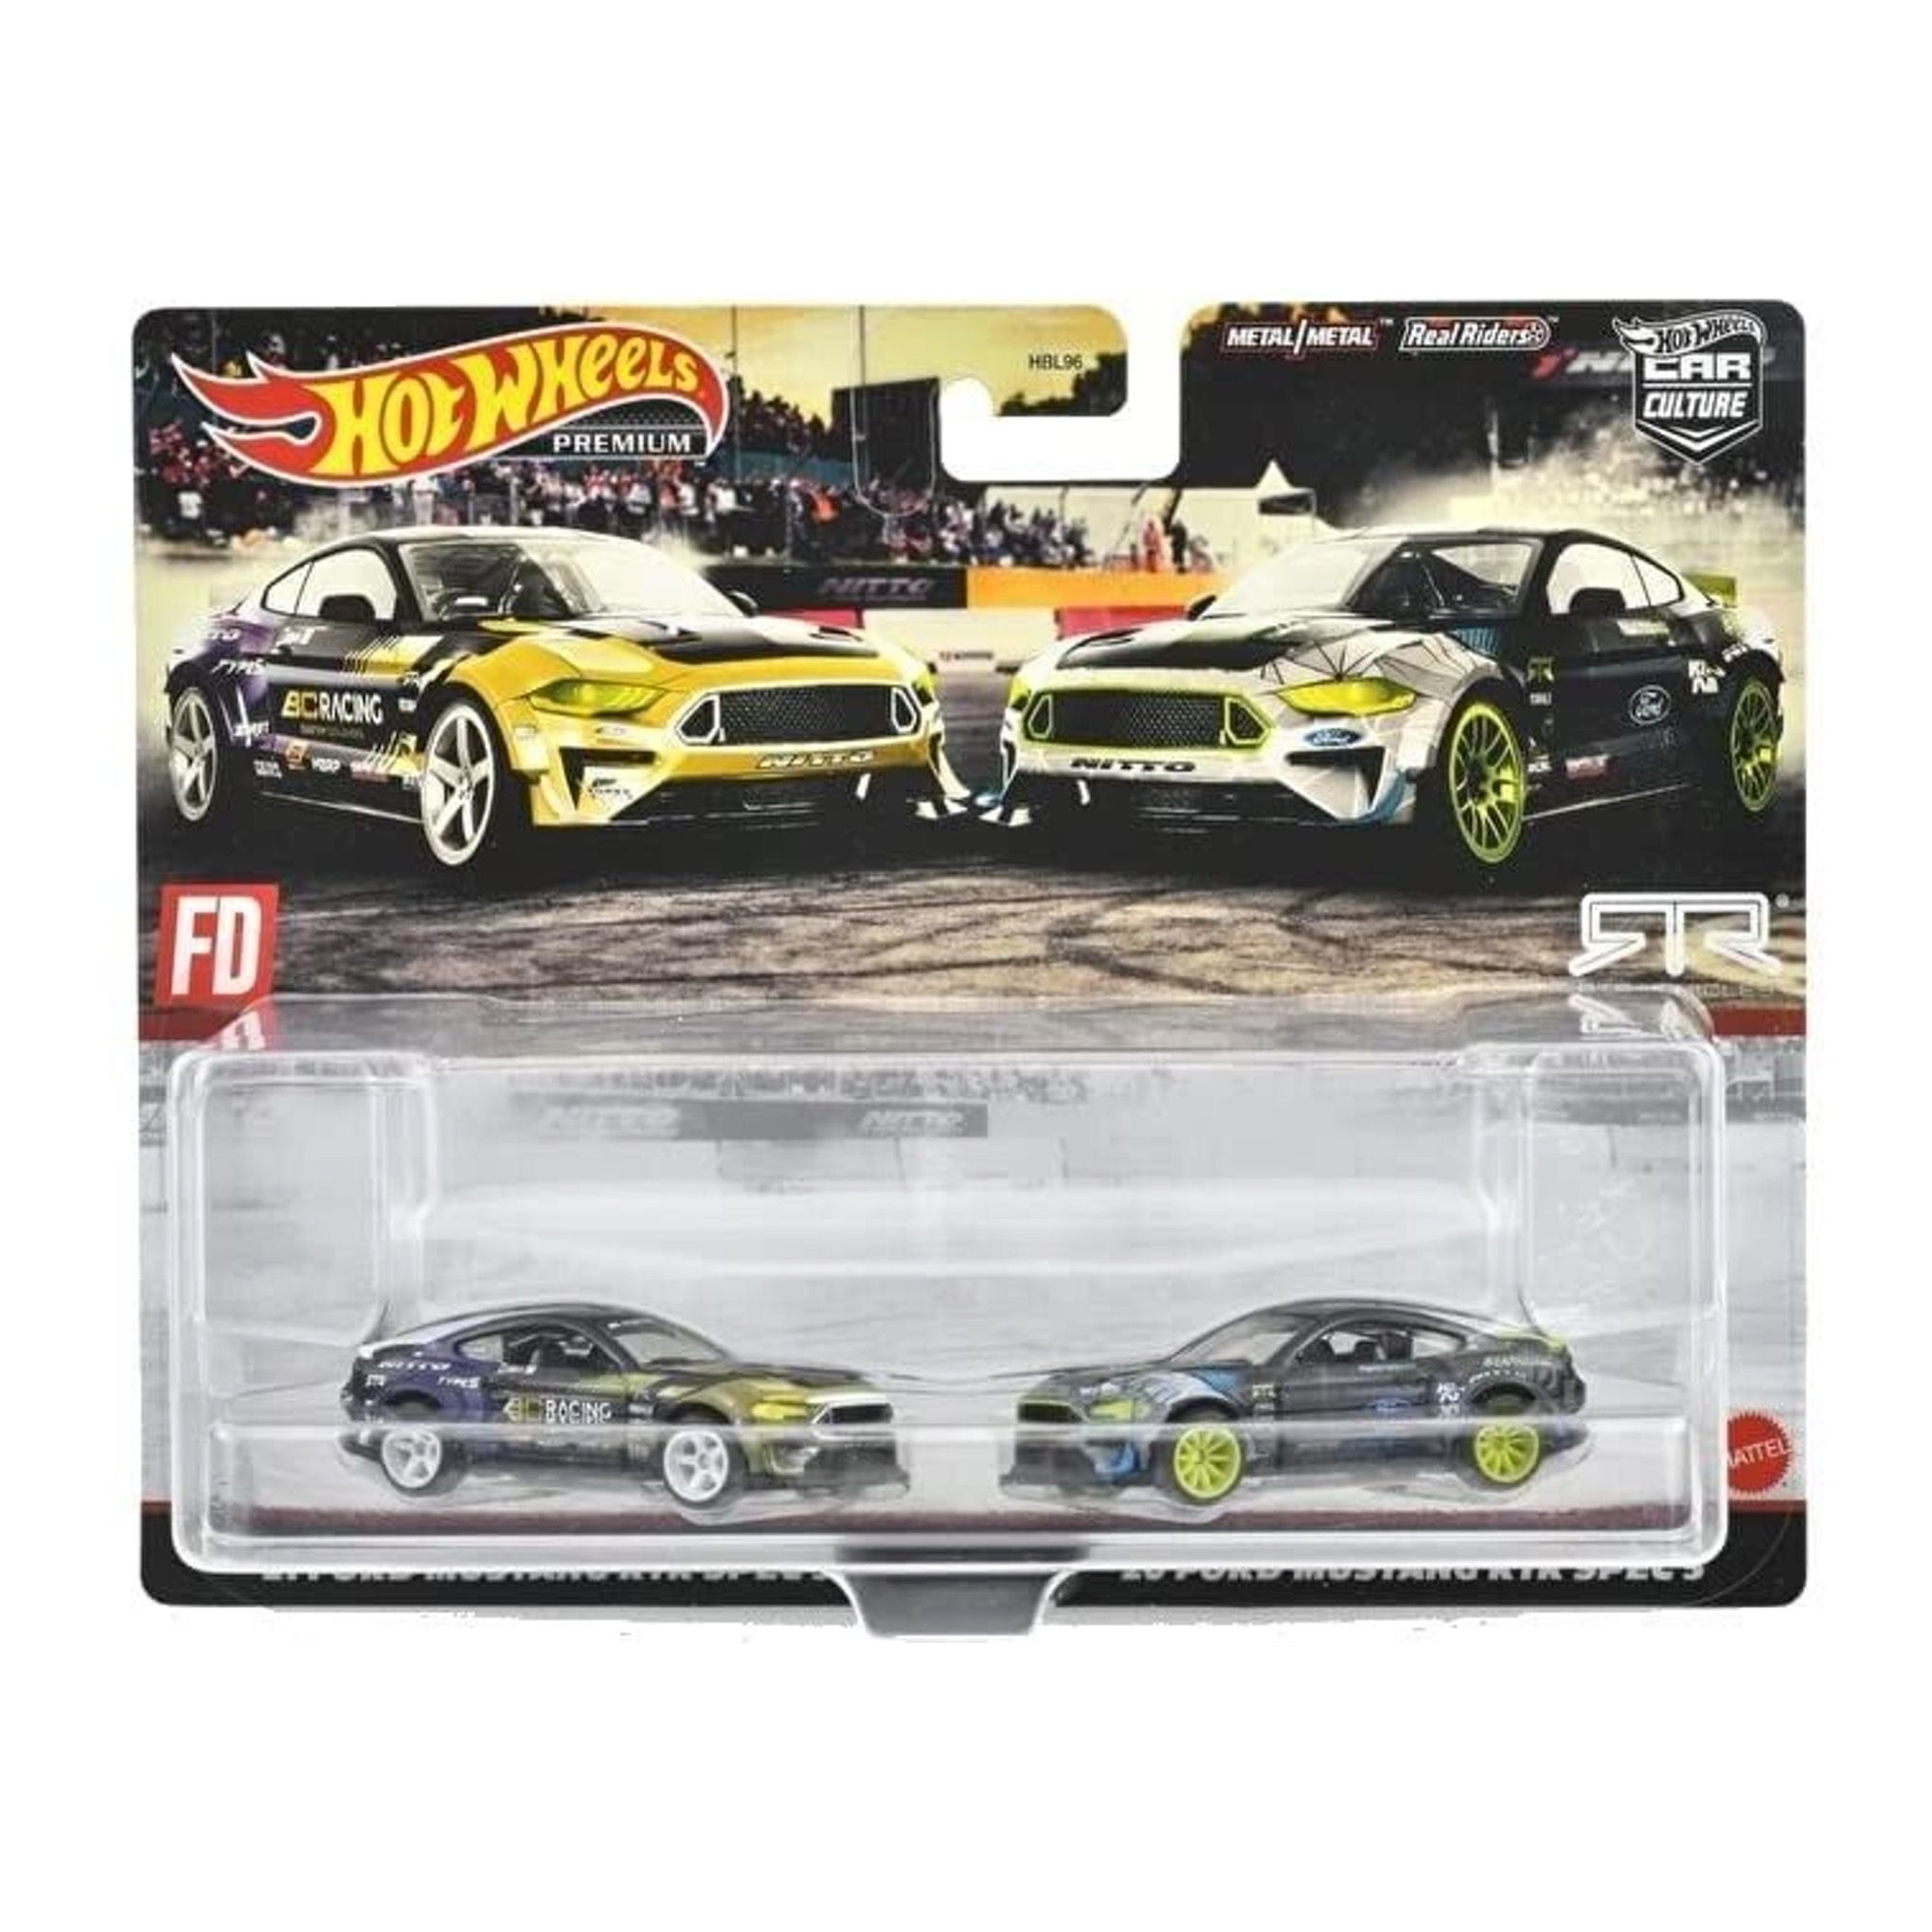 Машинка Hot Wheels HBL96-HCY71 металлическая 21 Ford Mustang & 20 Ford Mustang original hot wheels double car culture premium metal diecast 1 64 voitures real riders lamborghini ford lancia kids toys for boy